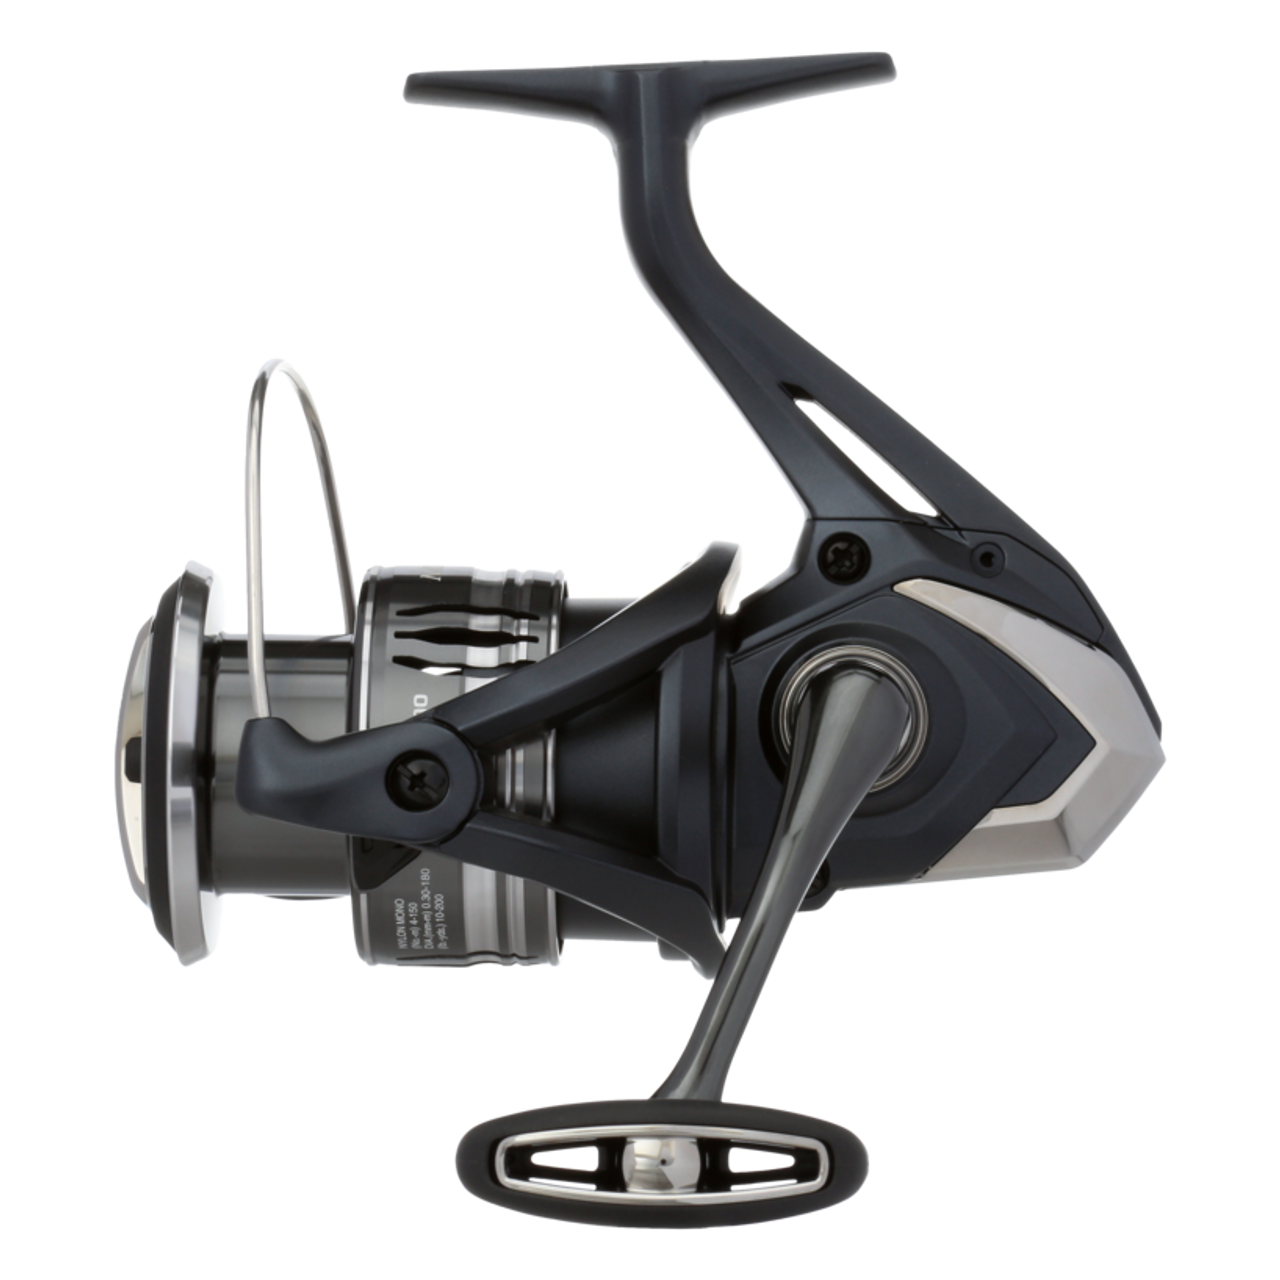 REELS PRODUCT SHIMANO, 52% OFF